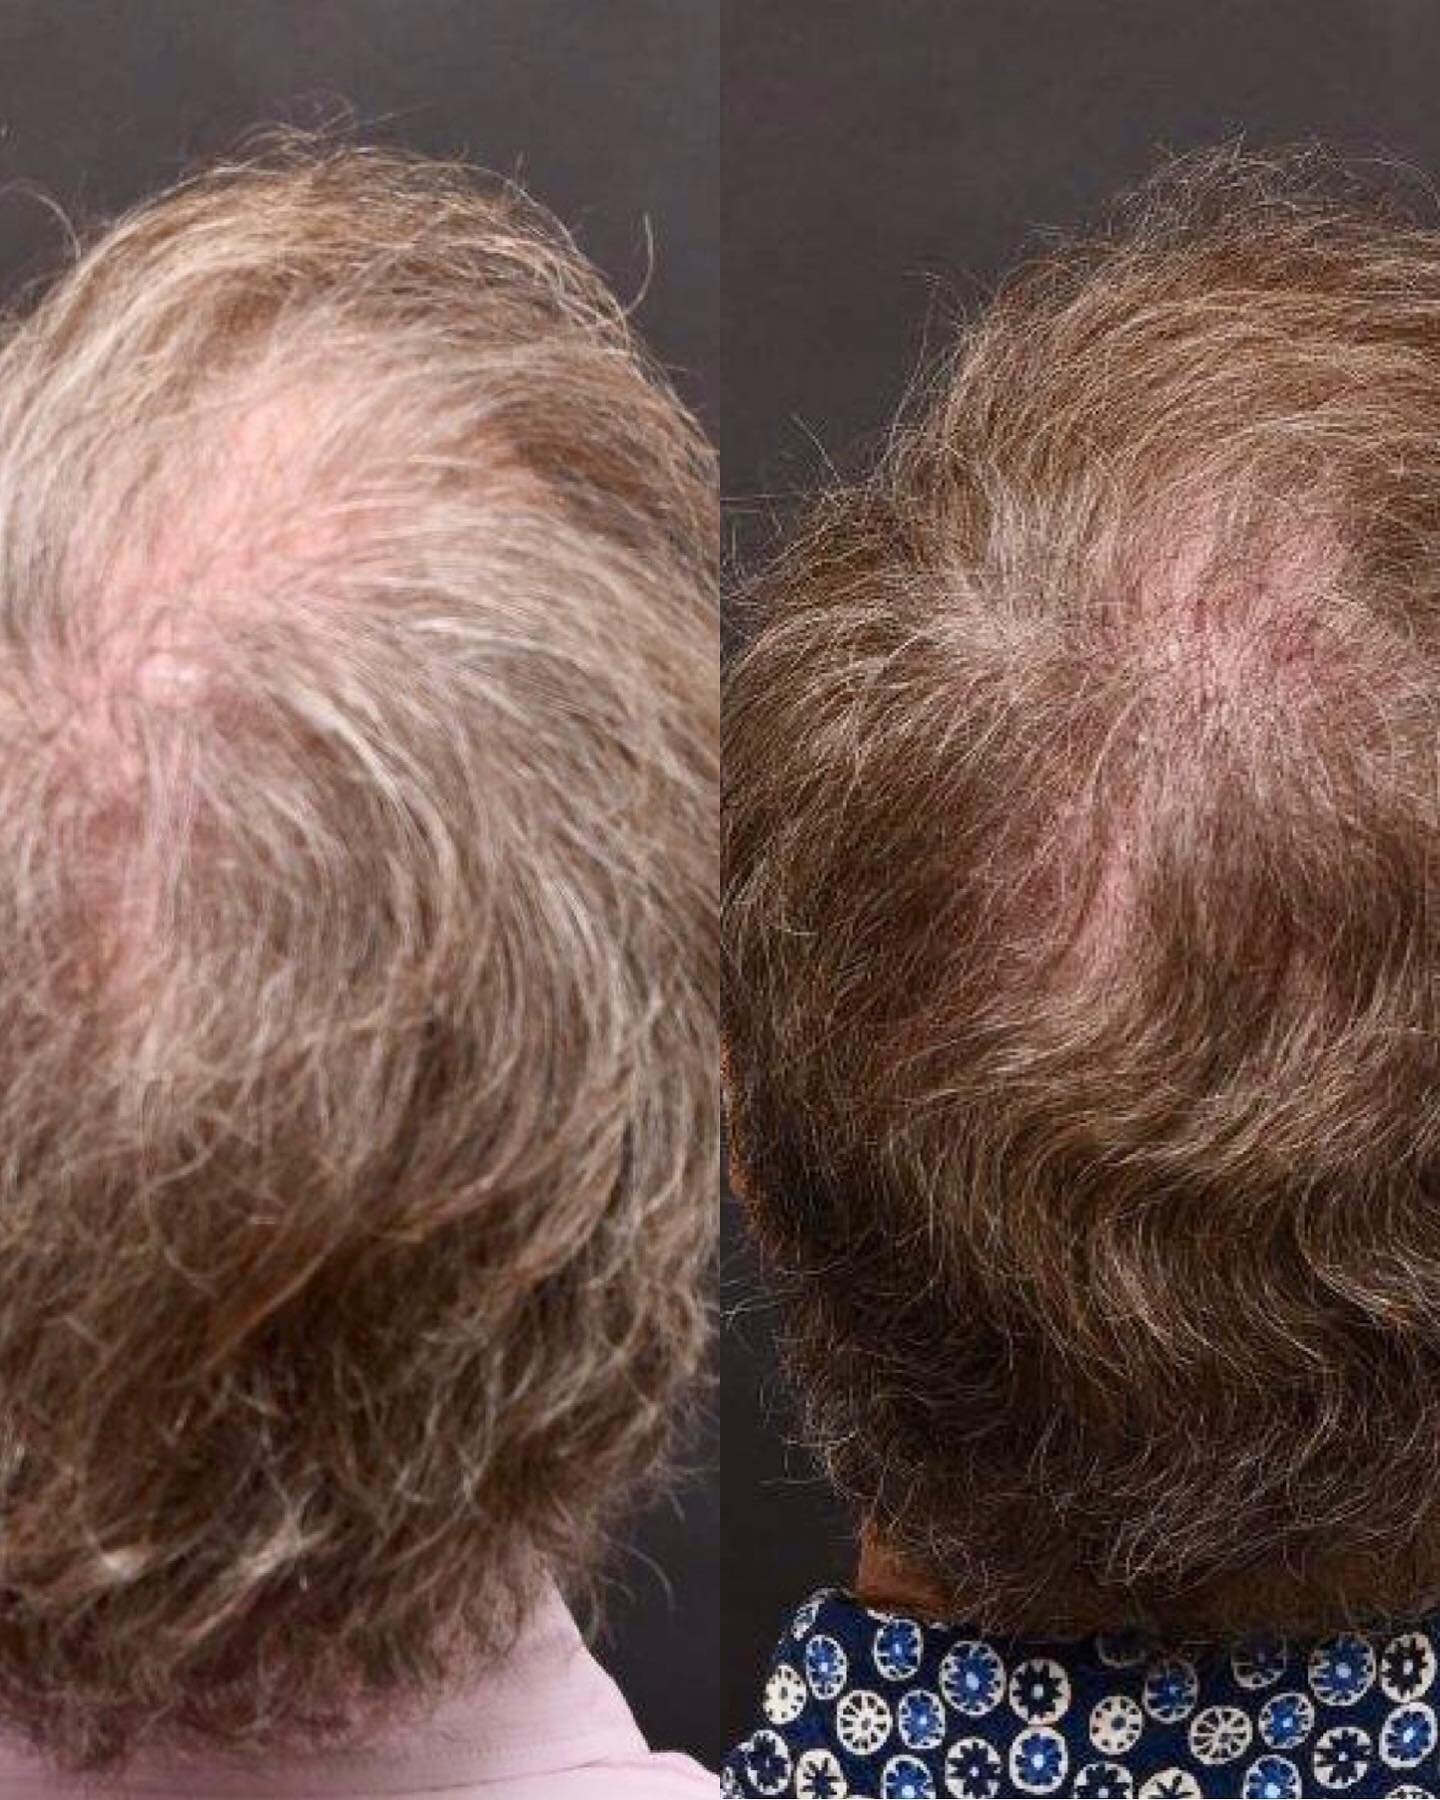 Check out these phenomenal results using the regenerative technology of exosomes for hair rejuvenation! This is his real hair y&rsquo;all!! 

Exosomes are regenerative nanotechnology with 100x more growth factor than prp! 

No blood draw needed! Easy